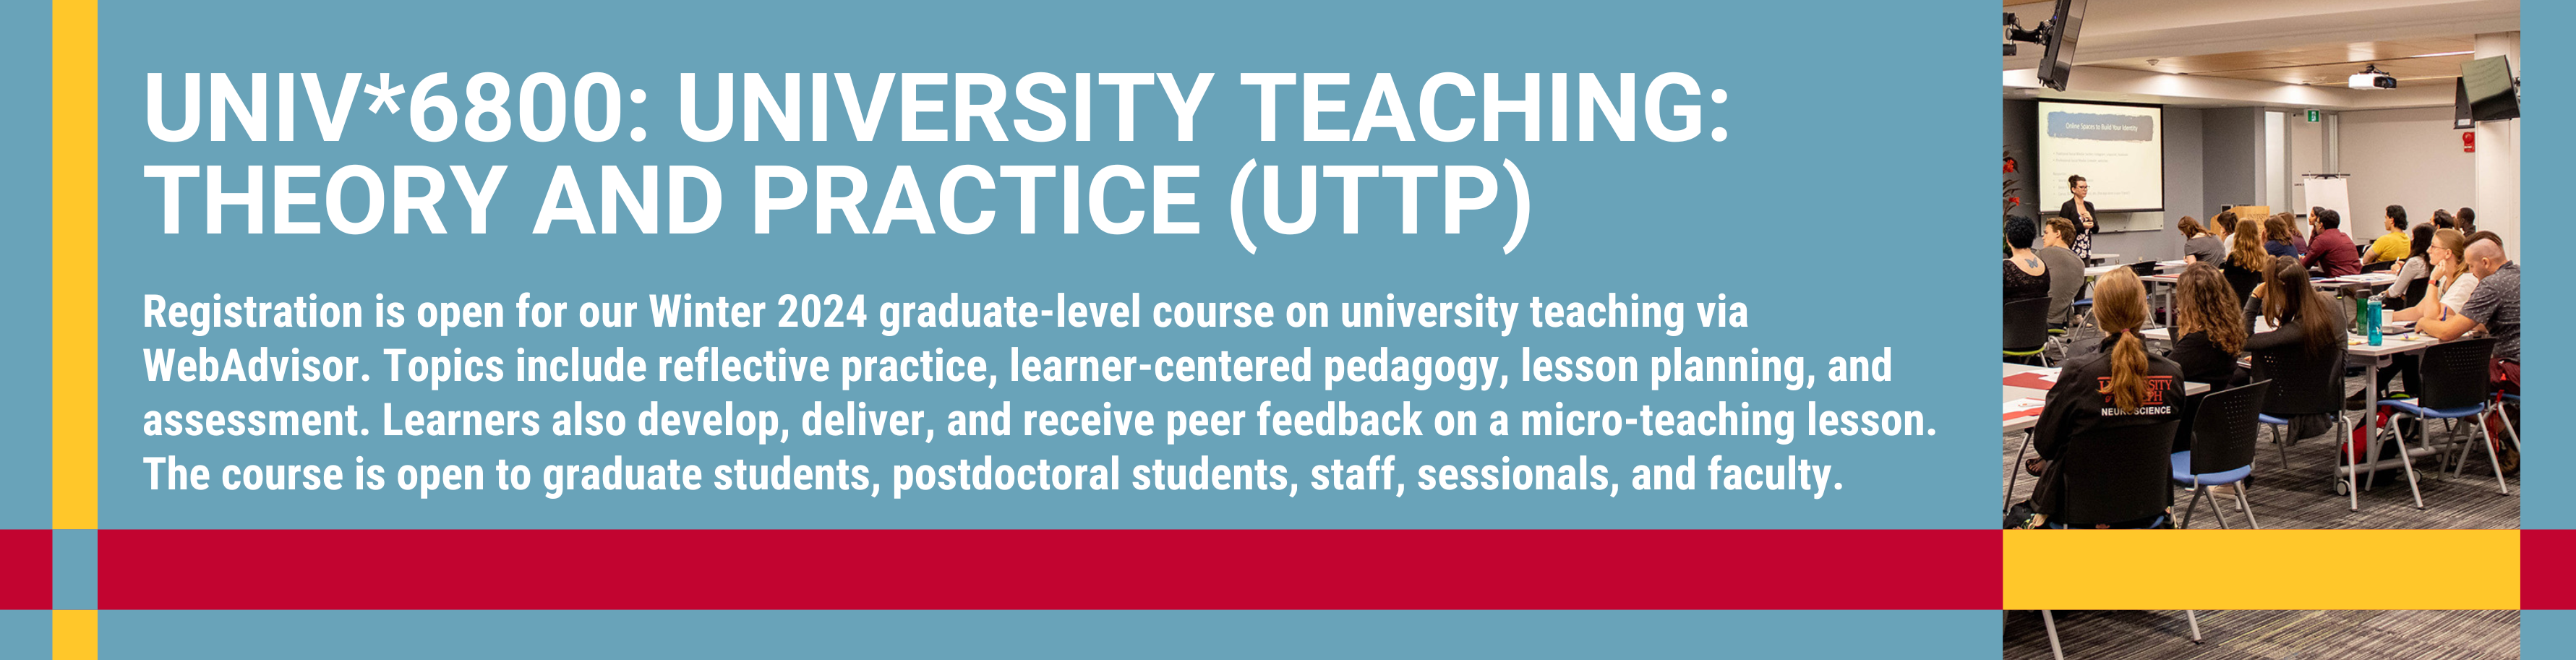 Registration is open for our Winter 2024 graduate-level course on university teaching via WebAdvisor. Topics include reflective practice, learner-centered pedagogy, lesson planning, and assessment. Learners also develop, deliver, and receive peer feedback